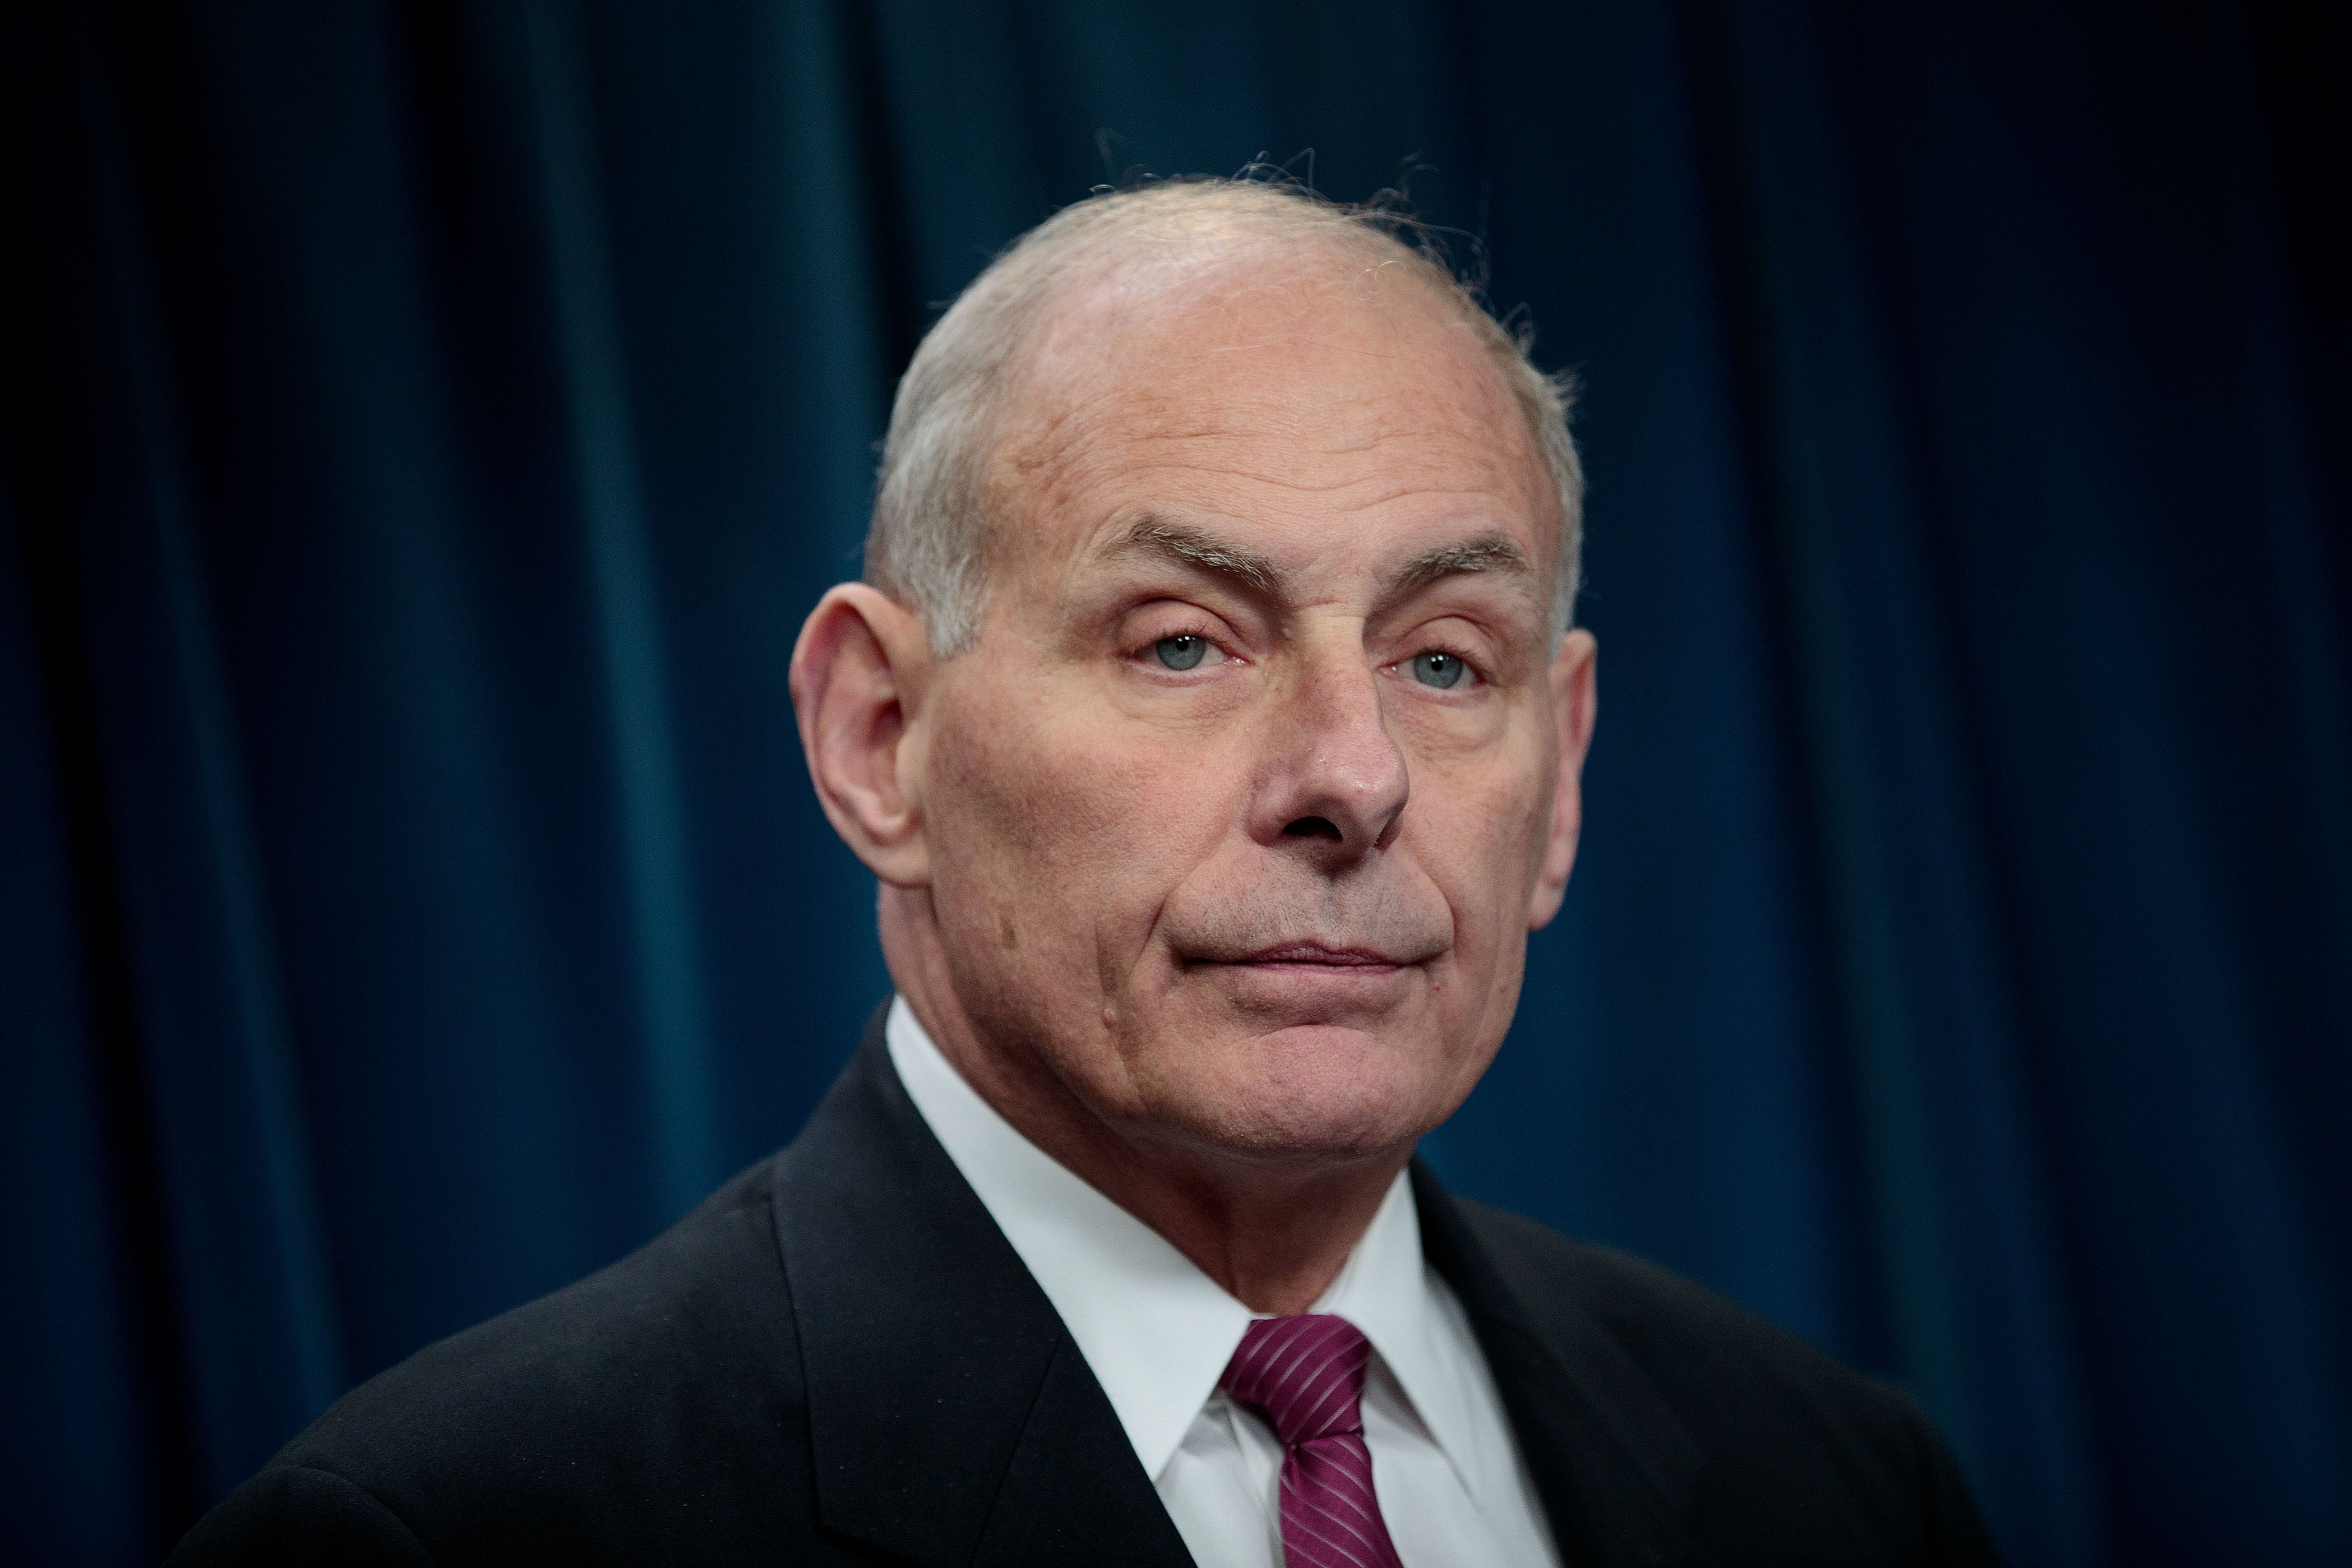 John Kelly Praised Robert E. Lee And Said 'Lack Of Compromise' Led To The Civil War